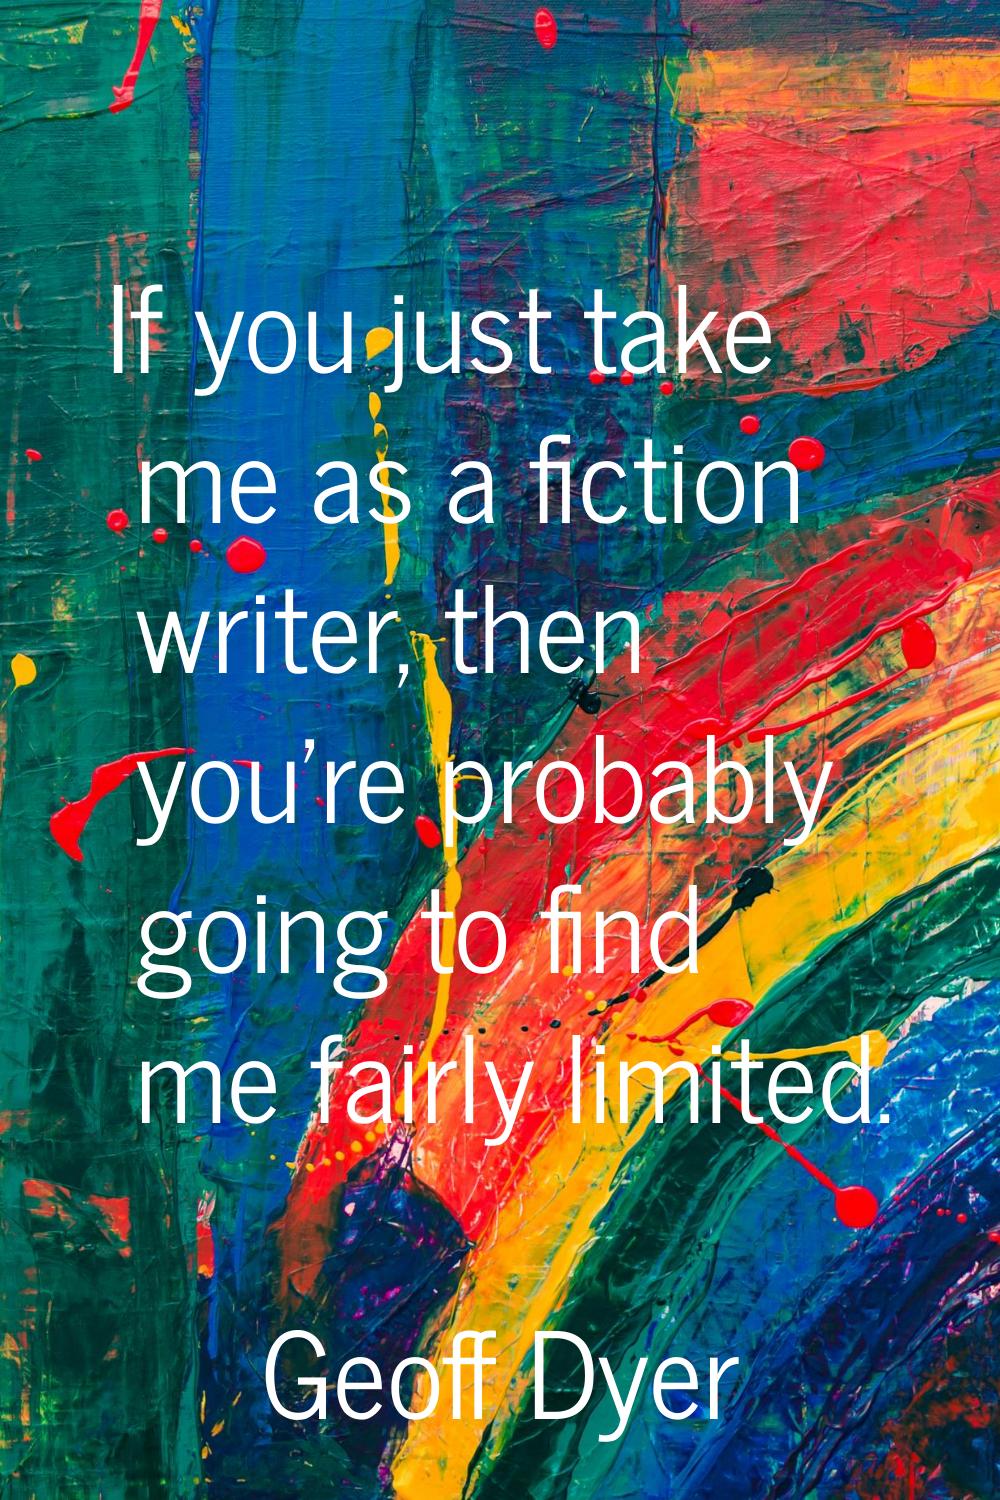 If you just take me as a fiction writer, then you're probably going to find me fairly limited.